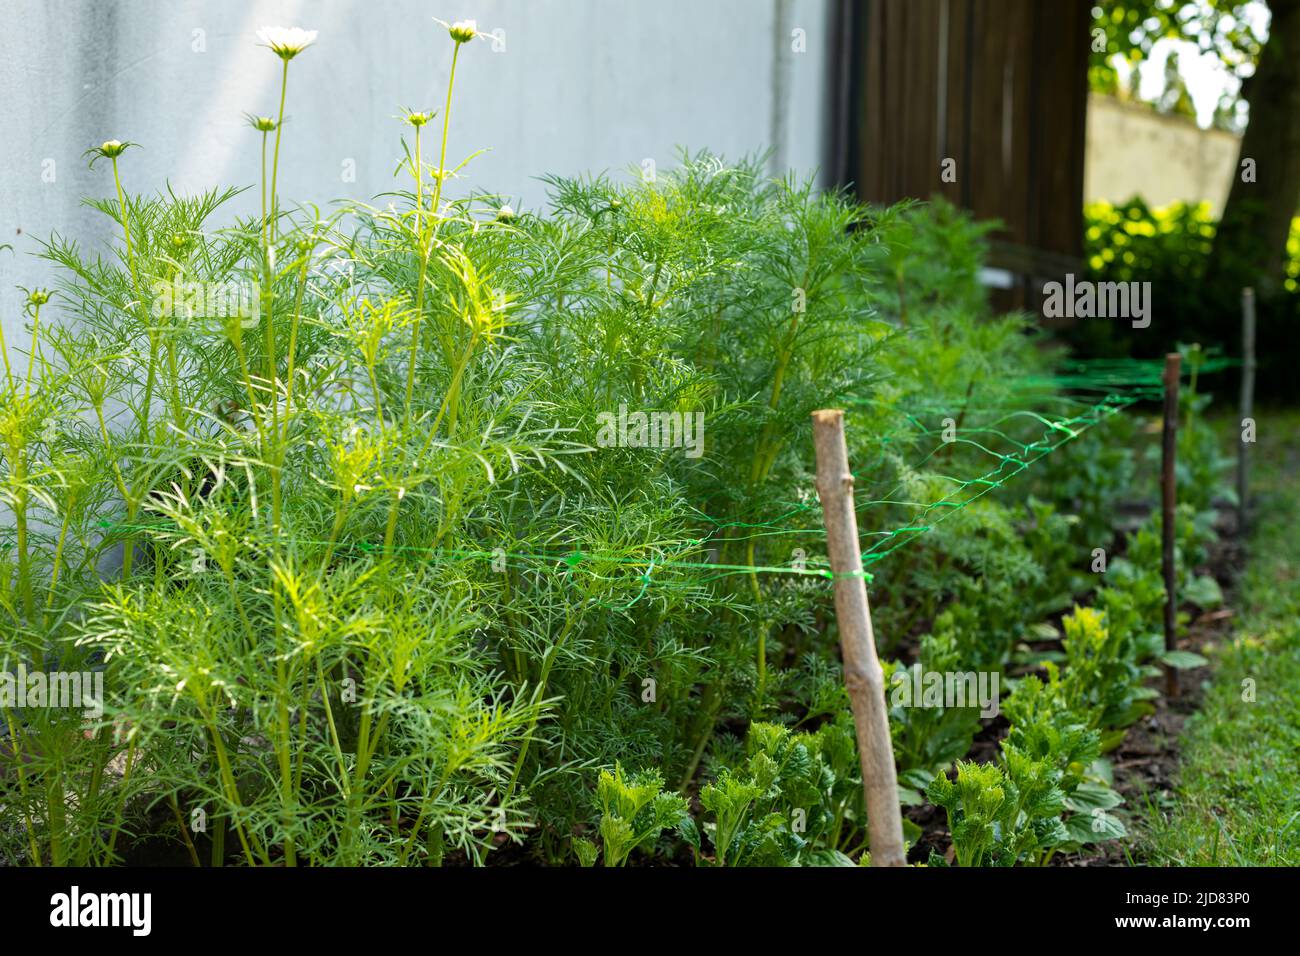 Cut flower netting. Plant support net. Using plastic garden netting to support cosmos plants. Flowerbed. Stock Photo